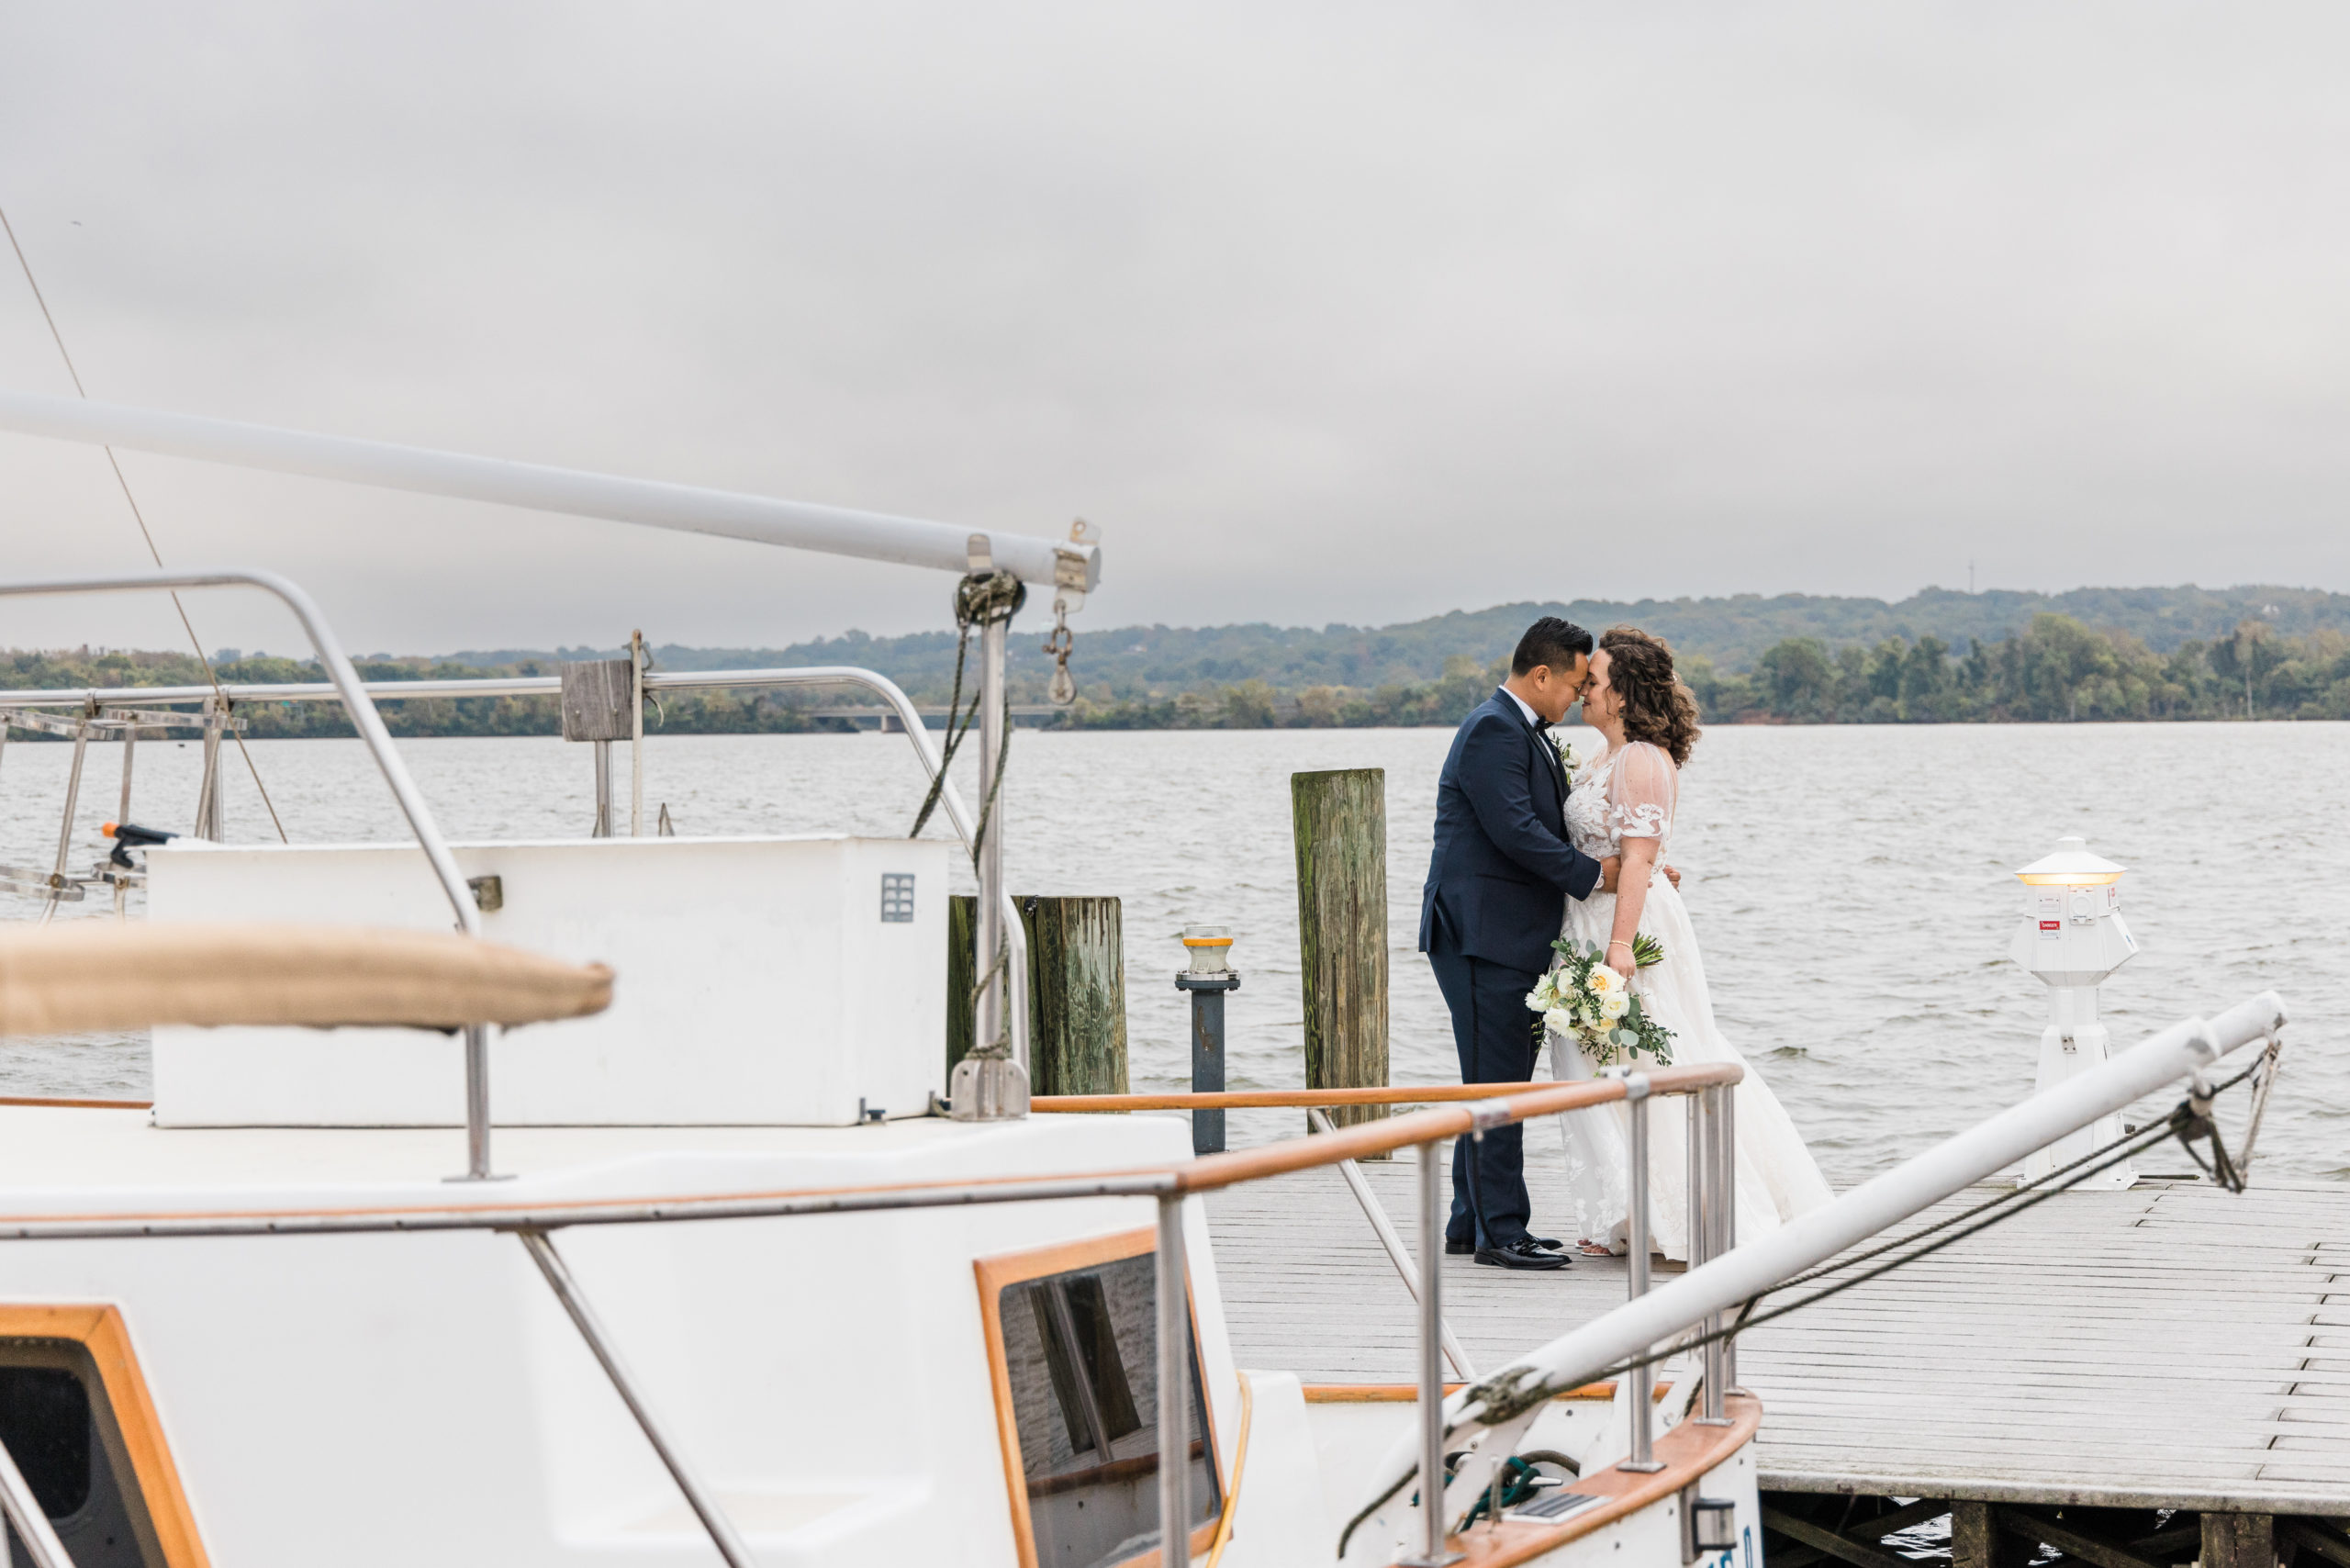 A bride and groom kiss on the dock by a boat